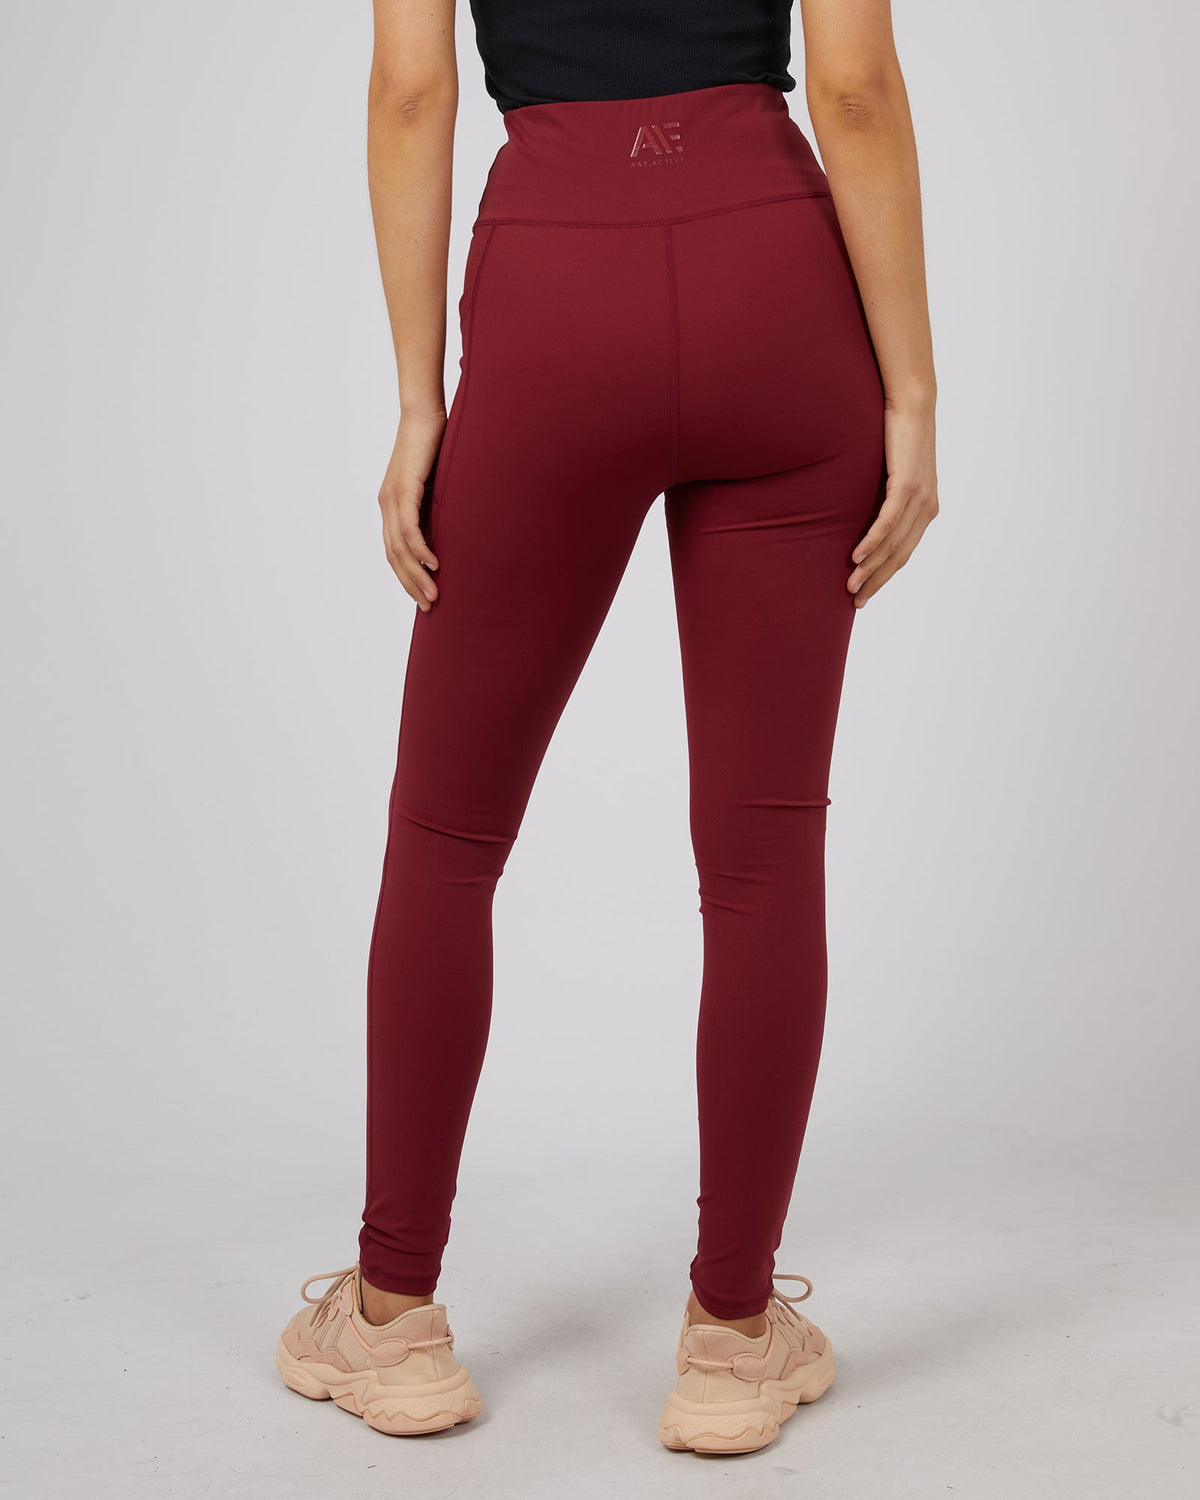 All About Eve-Active Legging Port-Edge Clothing